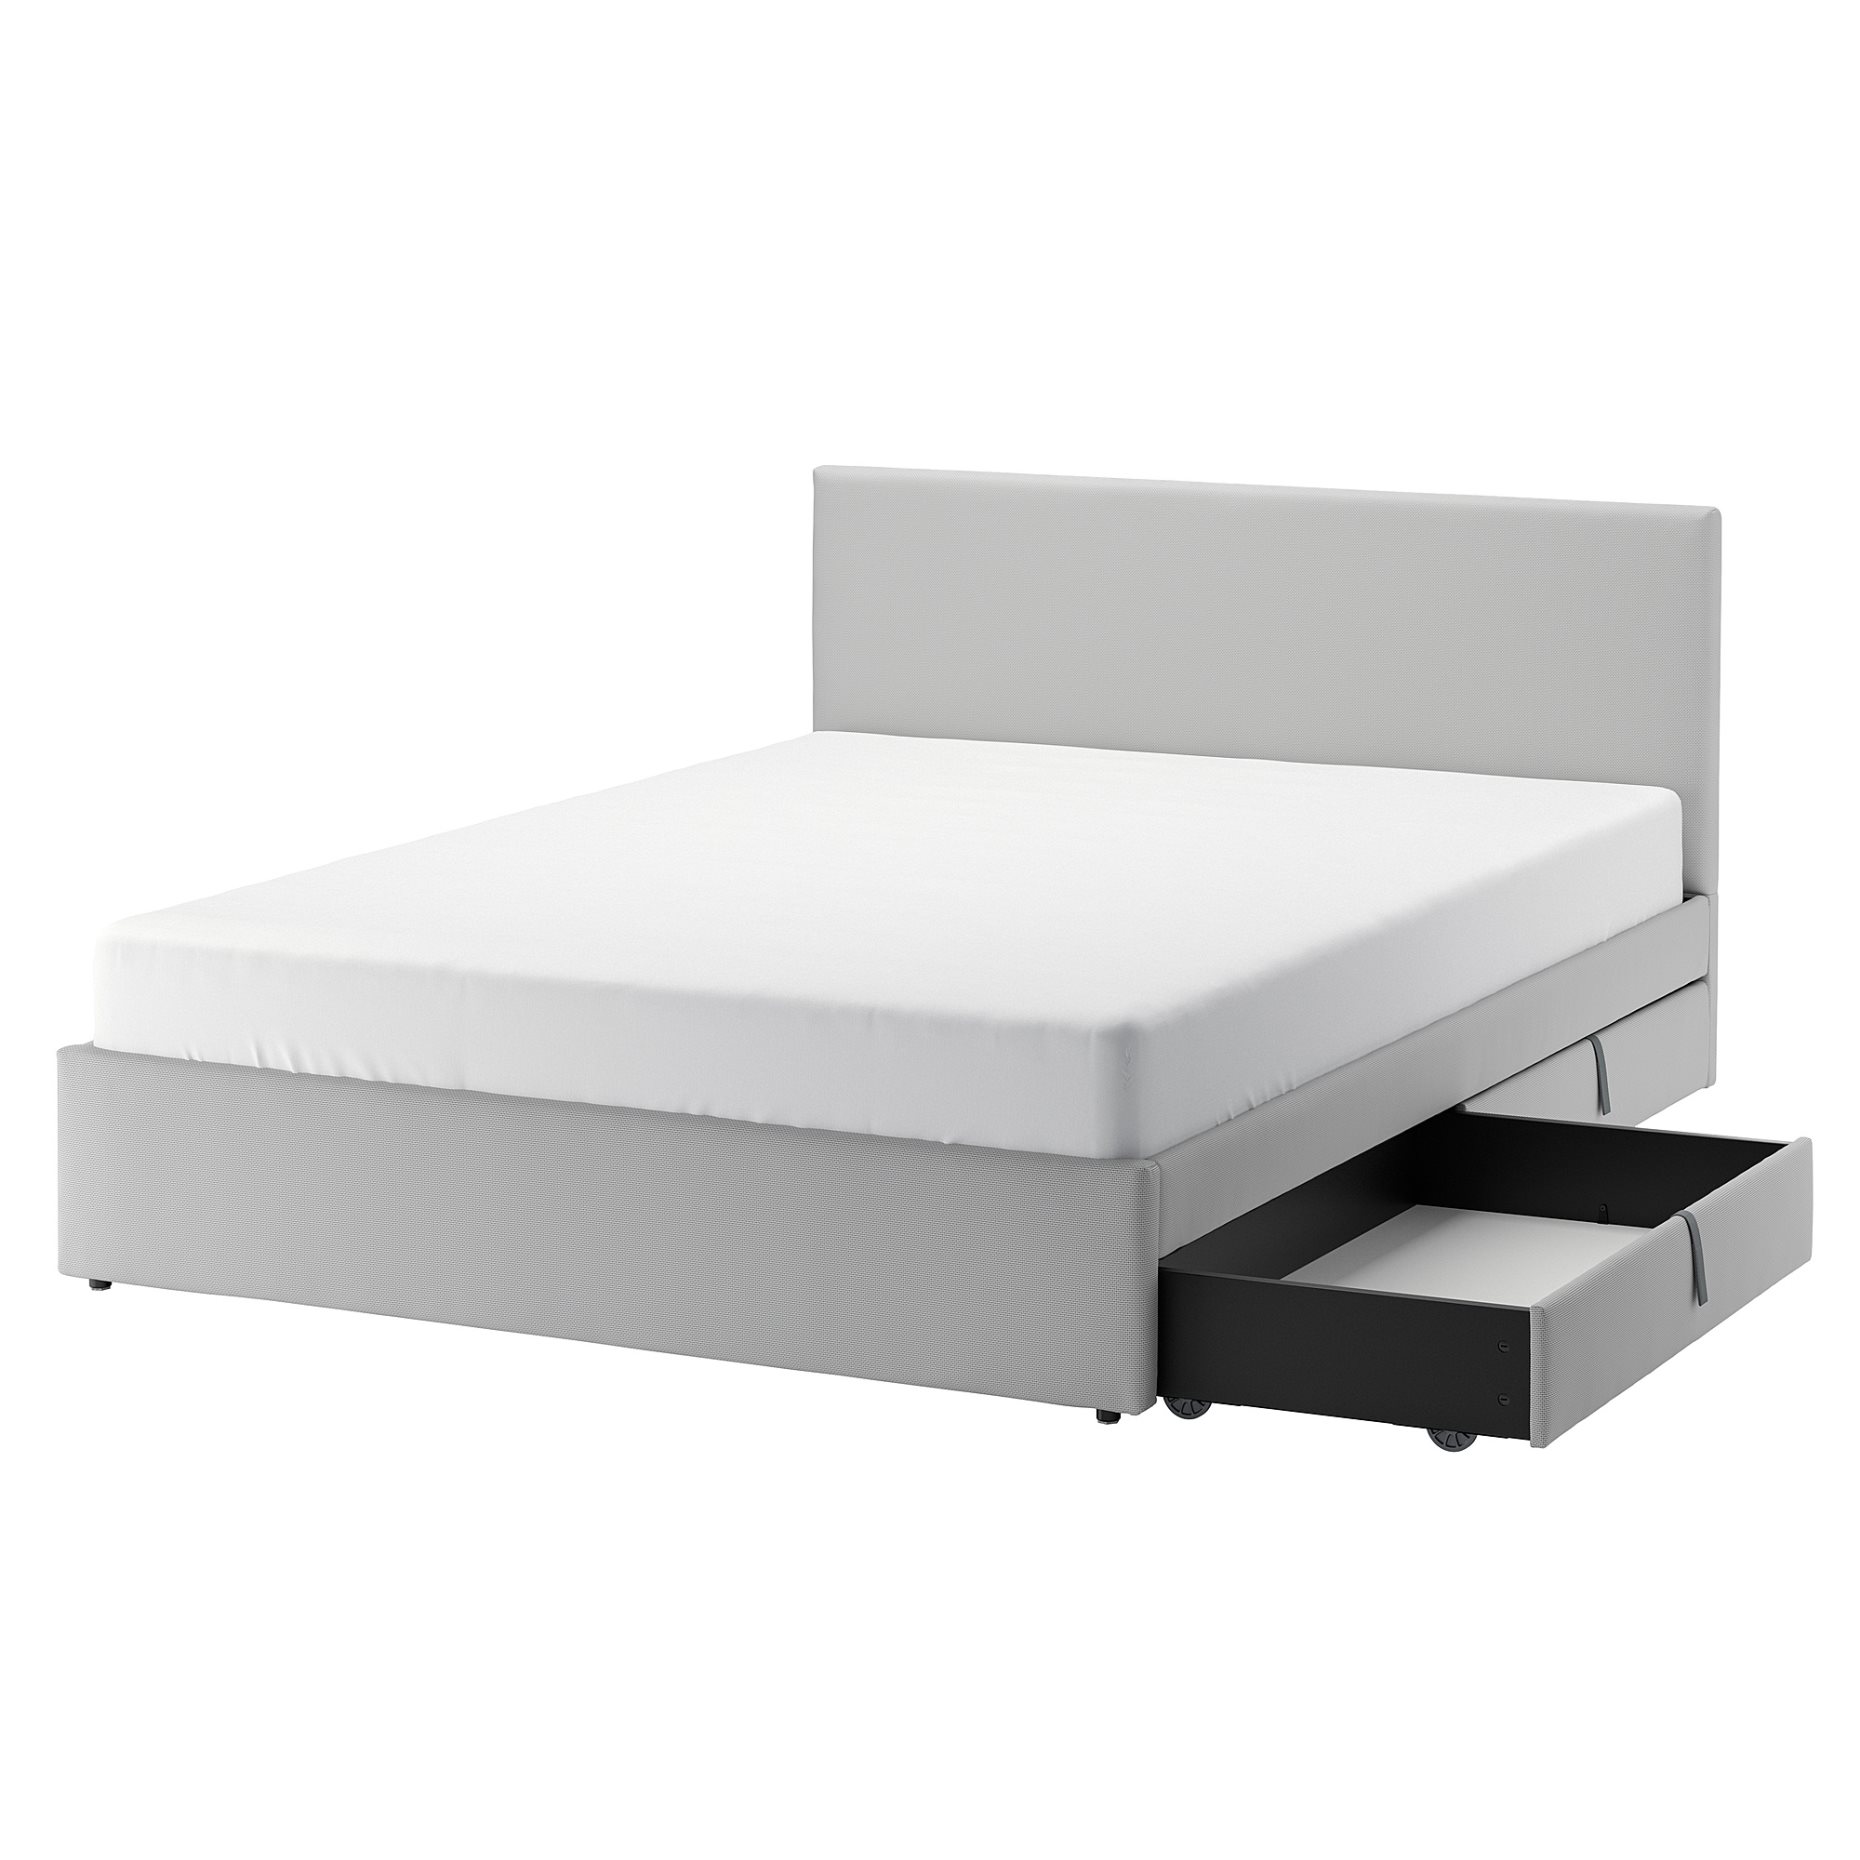 GLADSTAD, upholstered bed with 2 storage boxes, 140x200 cm, 094.067.98